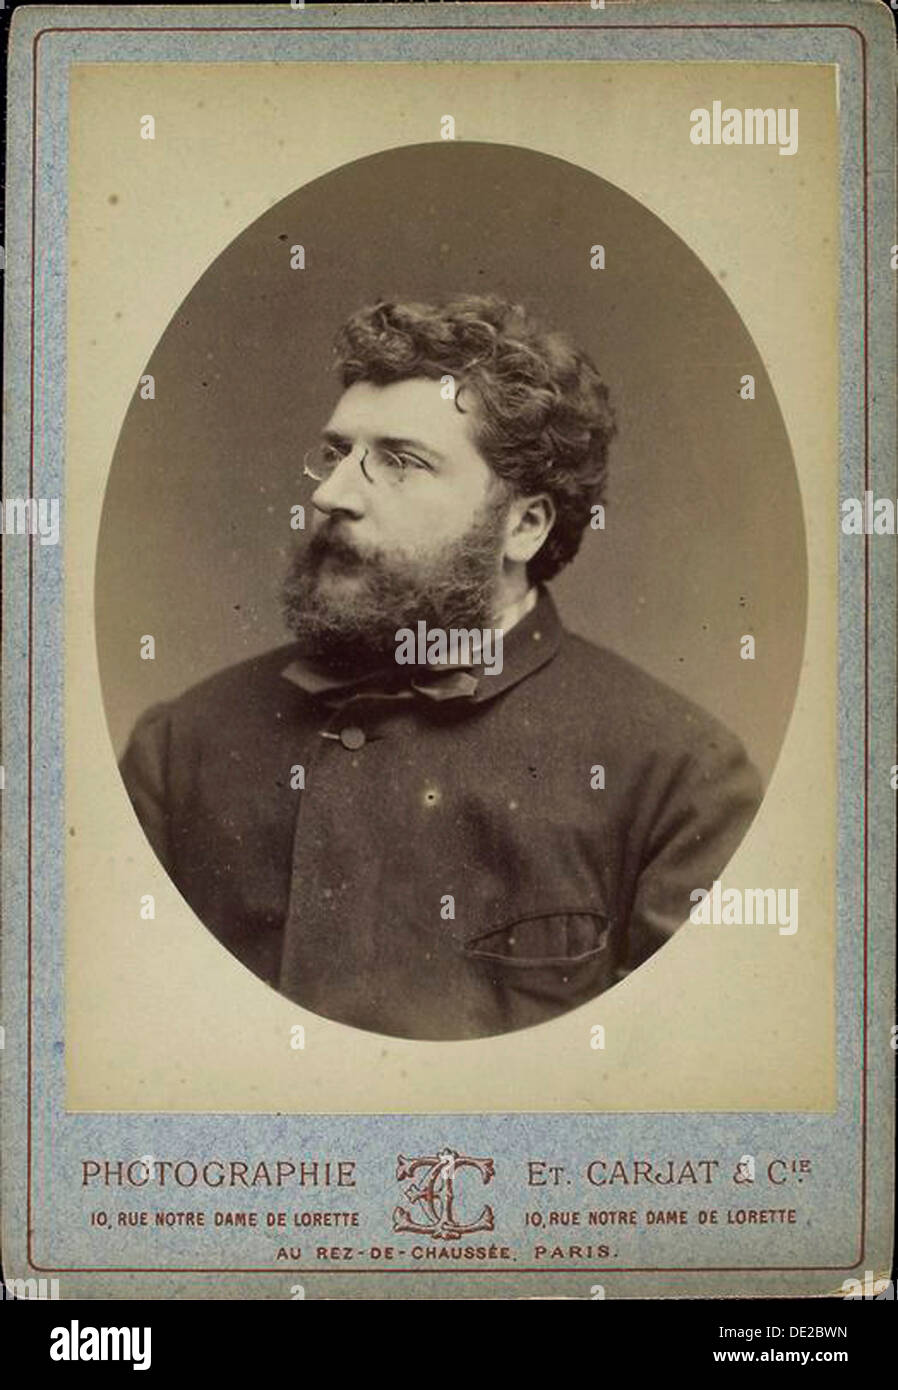 Georges Bizet, French composer and pianist, 1870s(?). Artist: Etienne Carjat Stock Photo